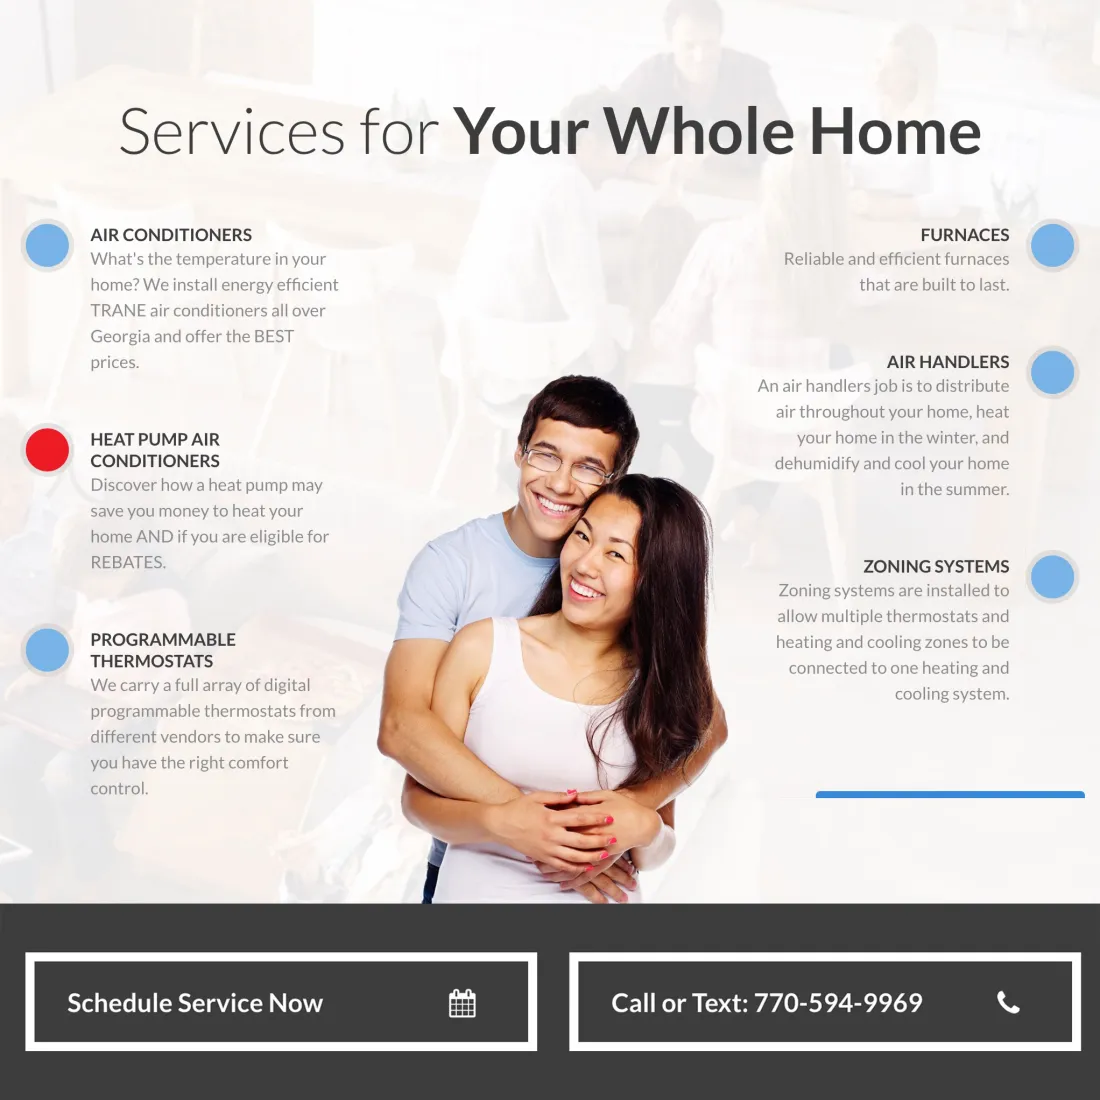 Image of website for Reliable Heating & Air